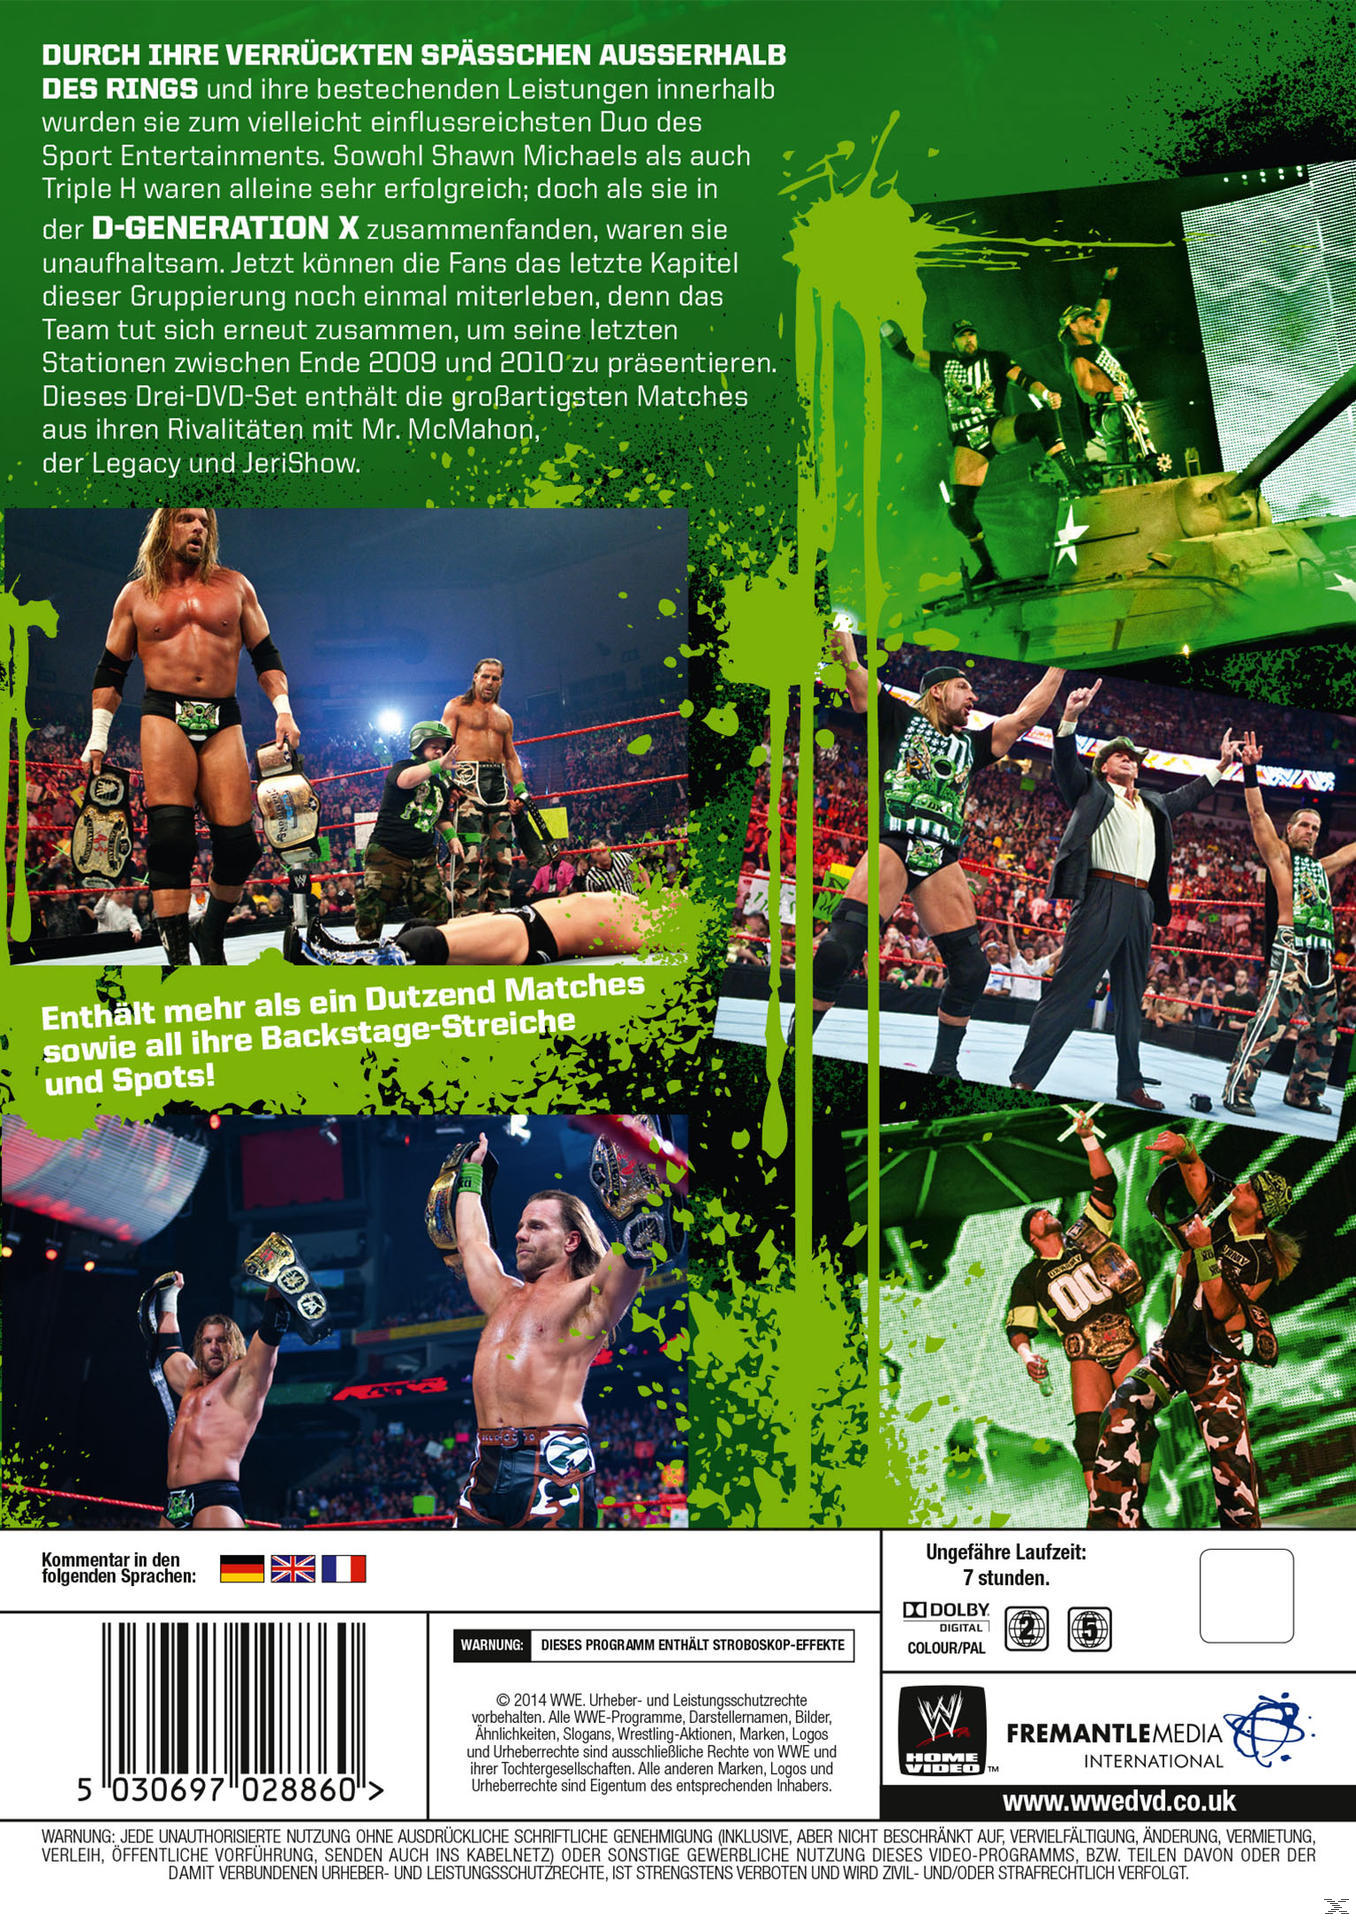 DX - One Last Stand DVD